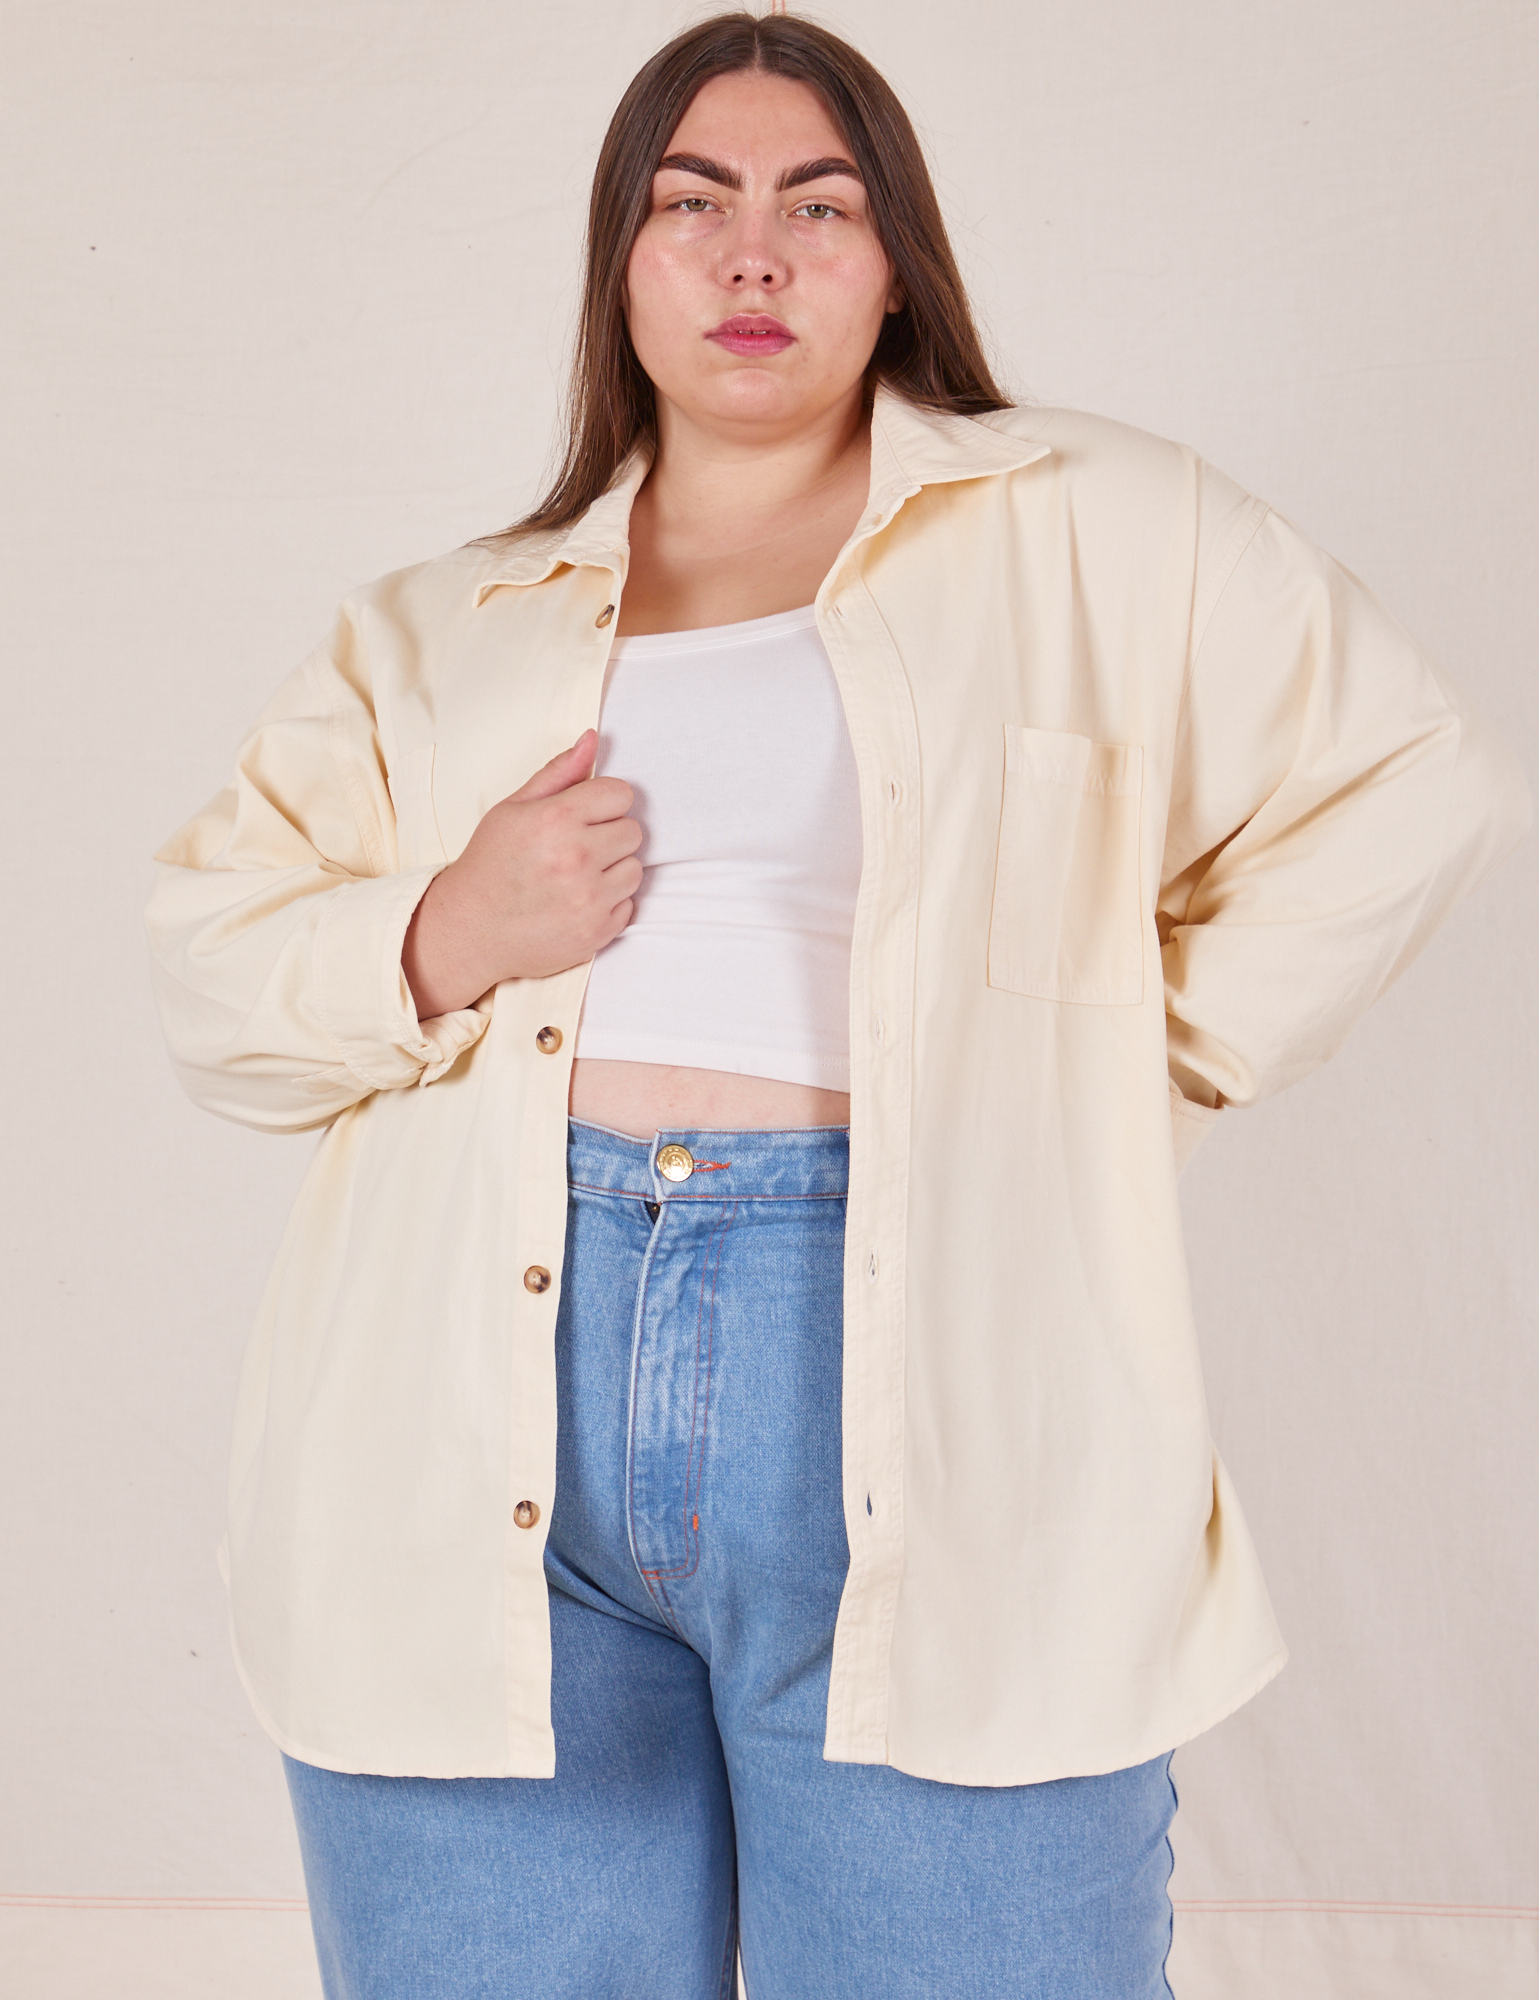 Marielena is wearing size 0XL Oversize Overshirt in Vintage Tee Off-White